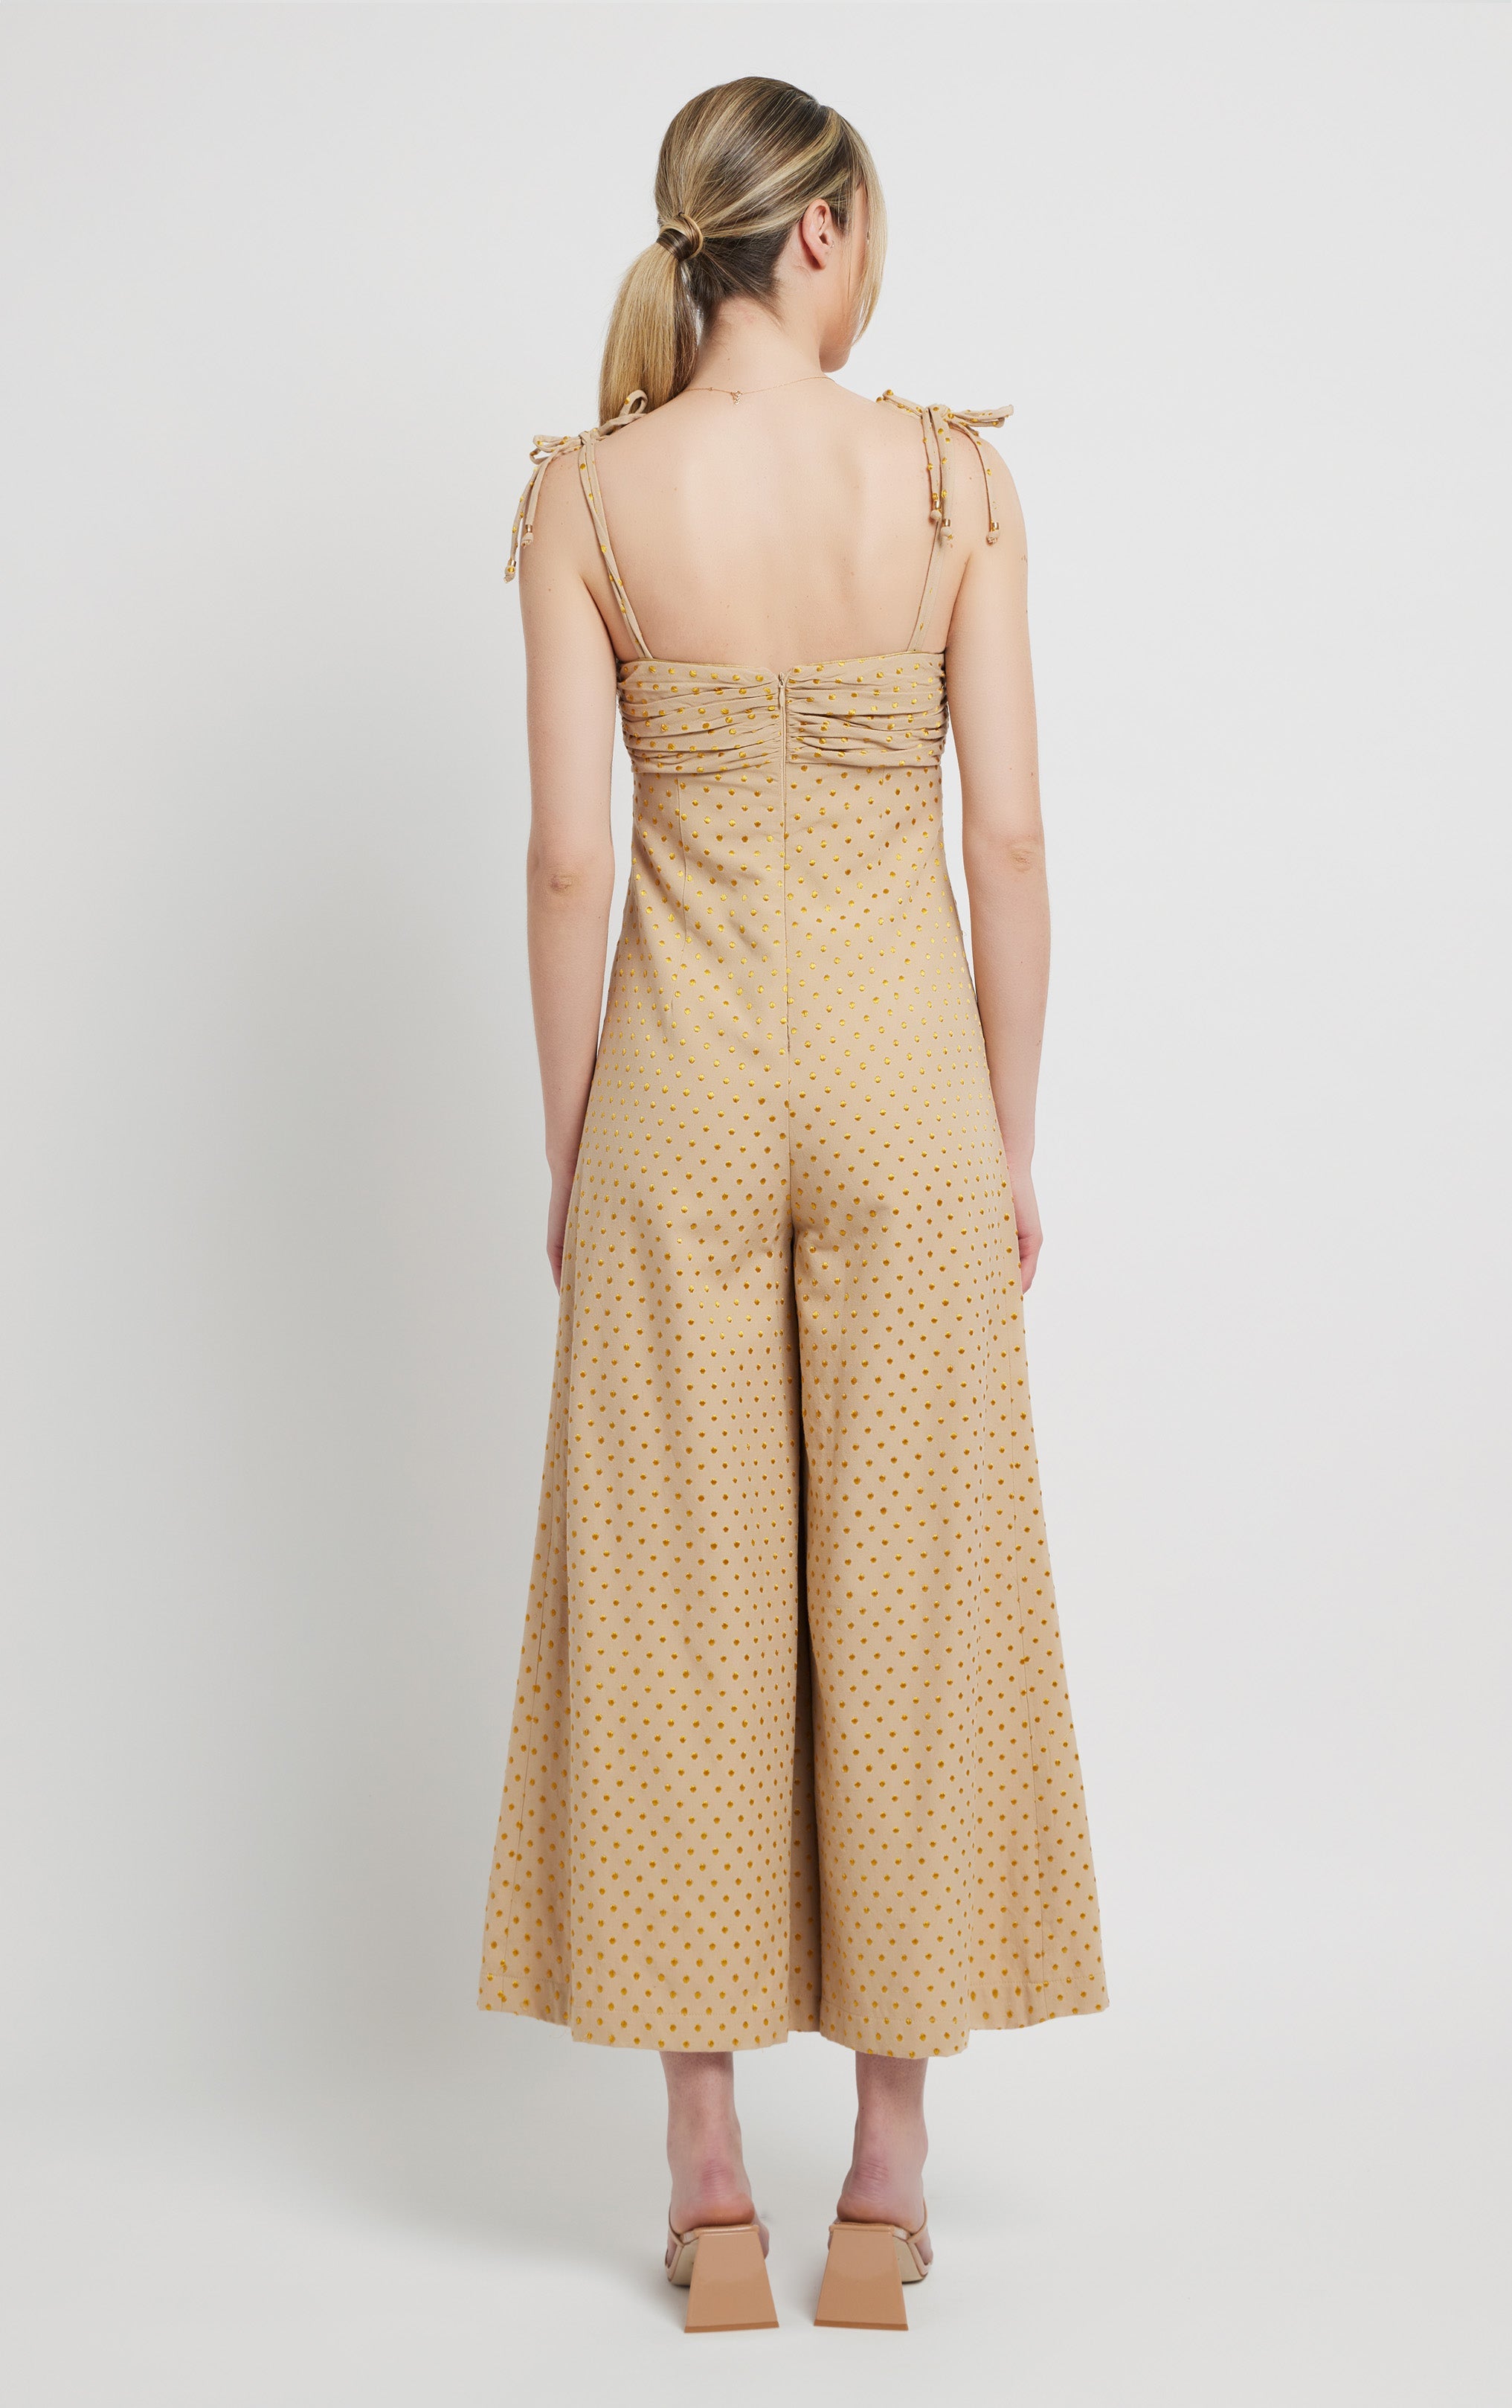 back profile of woman standing wearing khaki sleeveless jumpsuit with gold polka dots